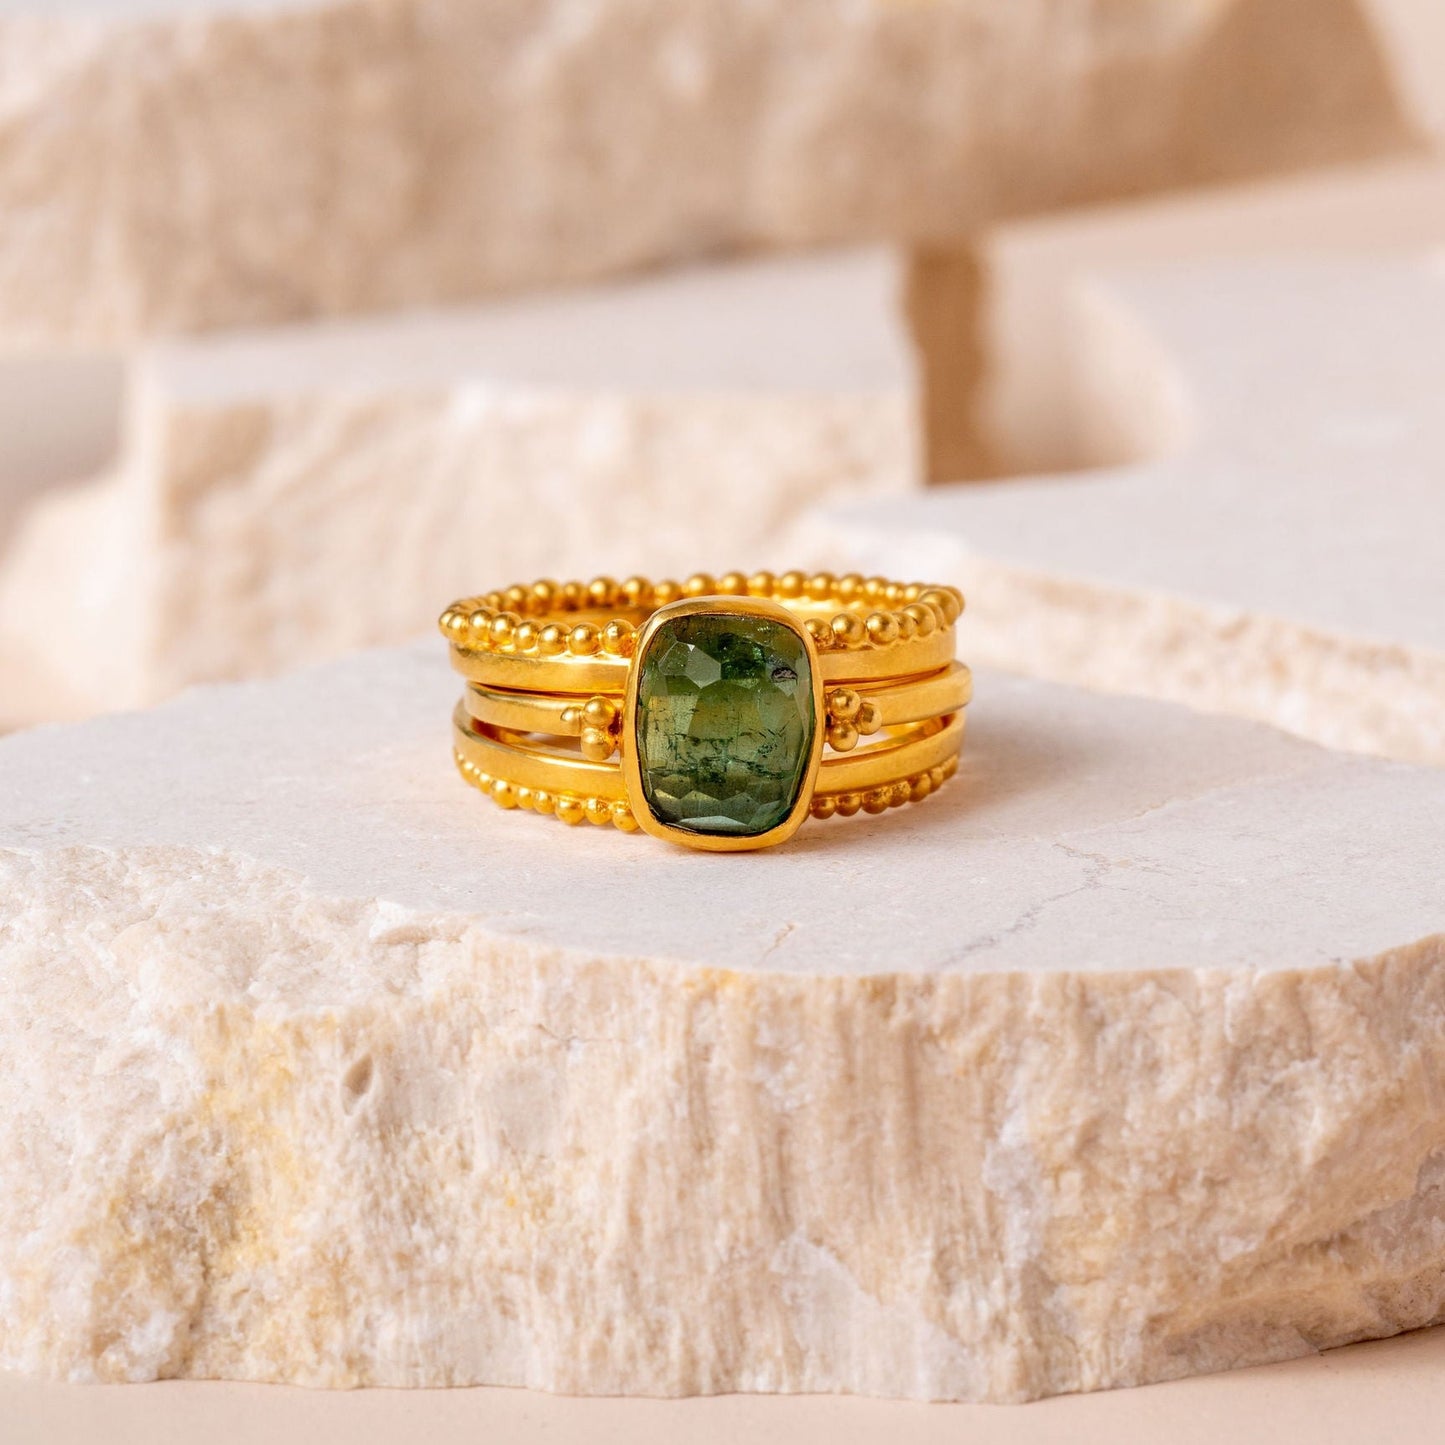 A collection of elegant gold rings, united by their masterful granulation craftsmanship and enhanced by vibrant green tourmaline gemstones